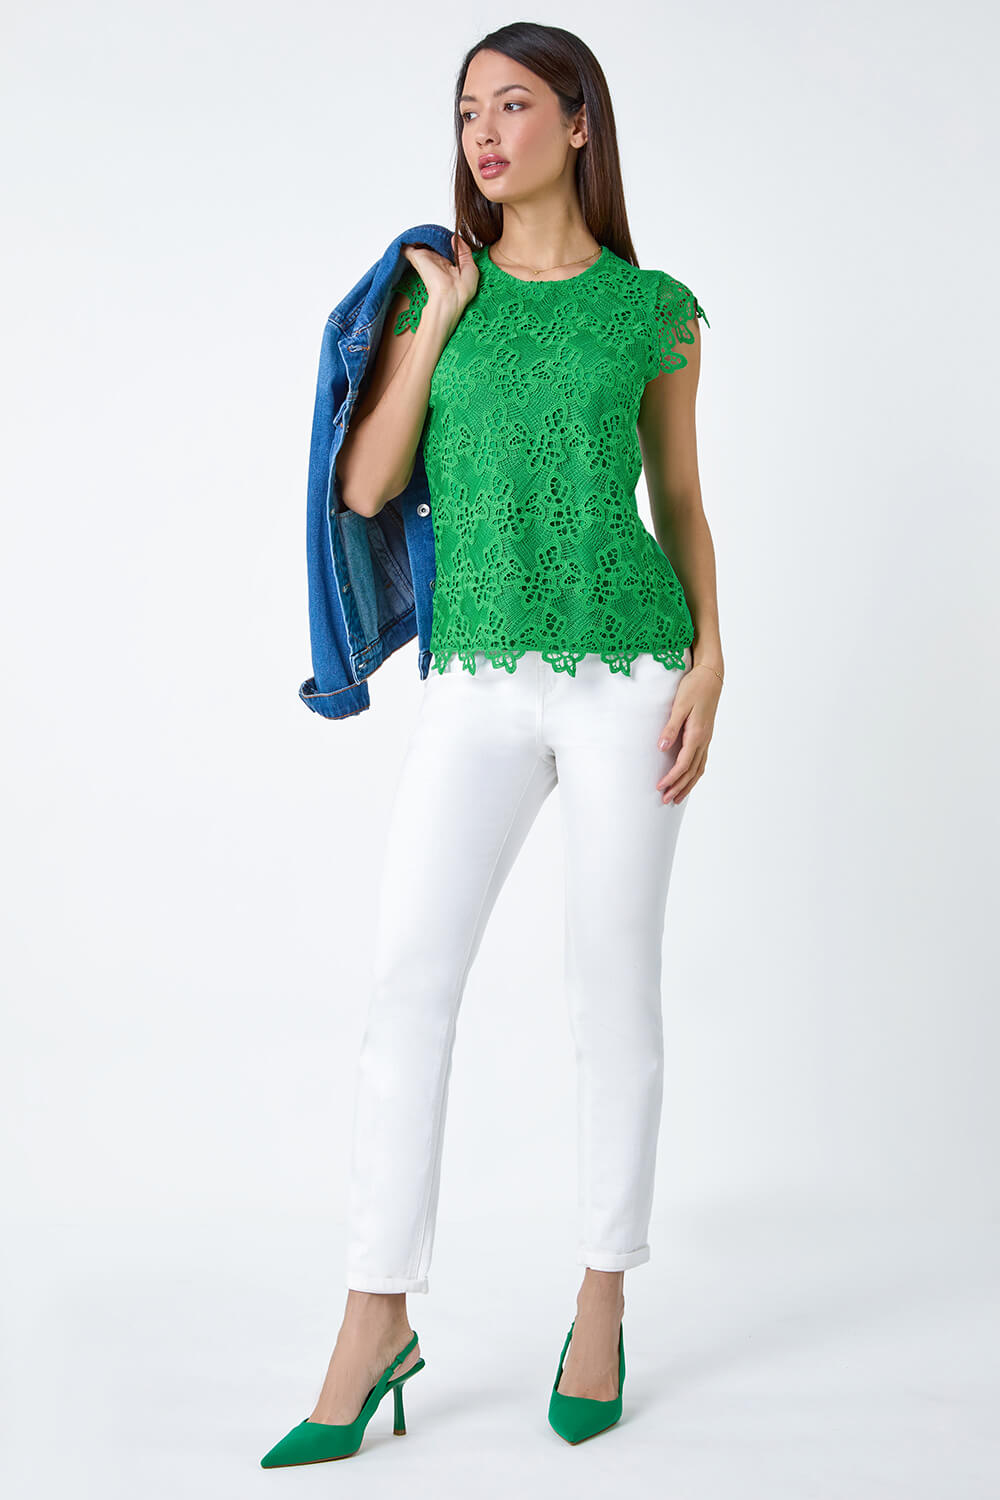 Green Floral Lace Sleeveless Top, Image 2 of 5